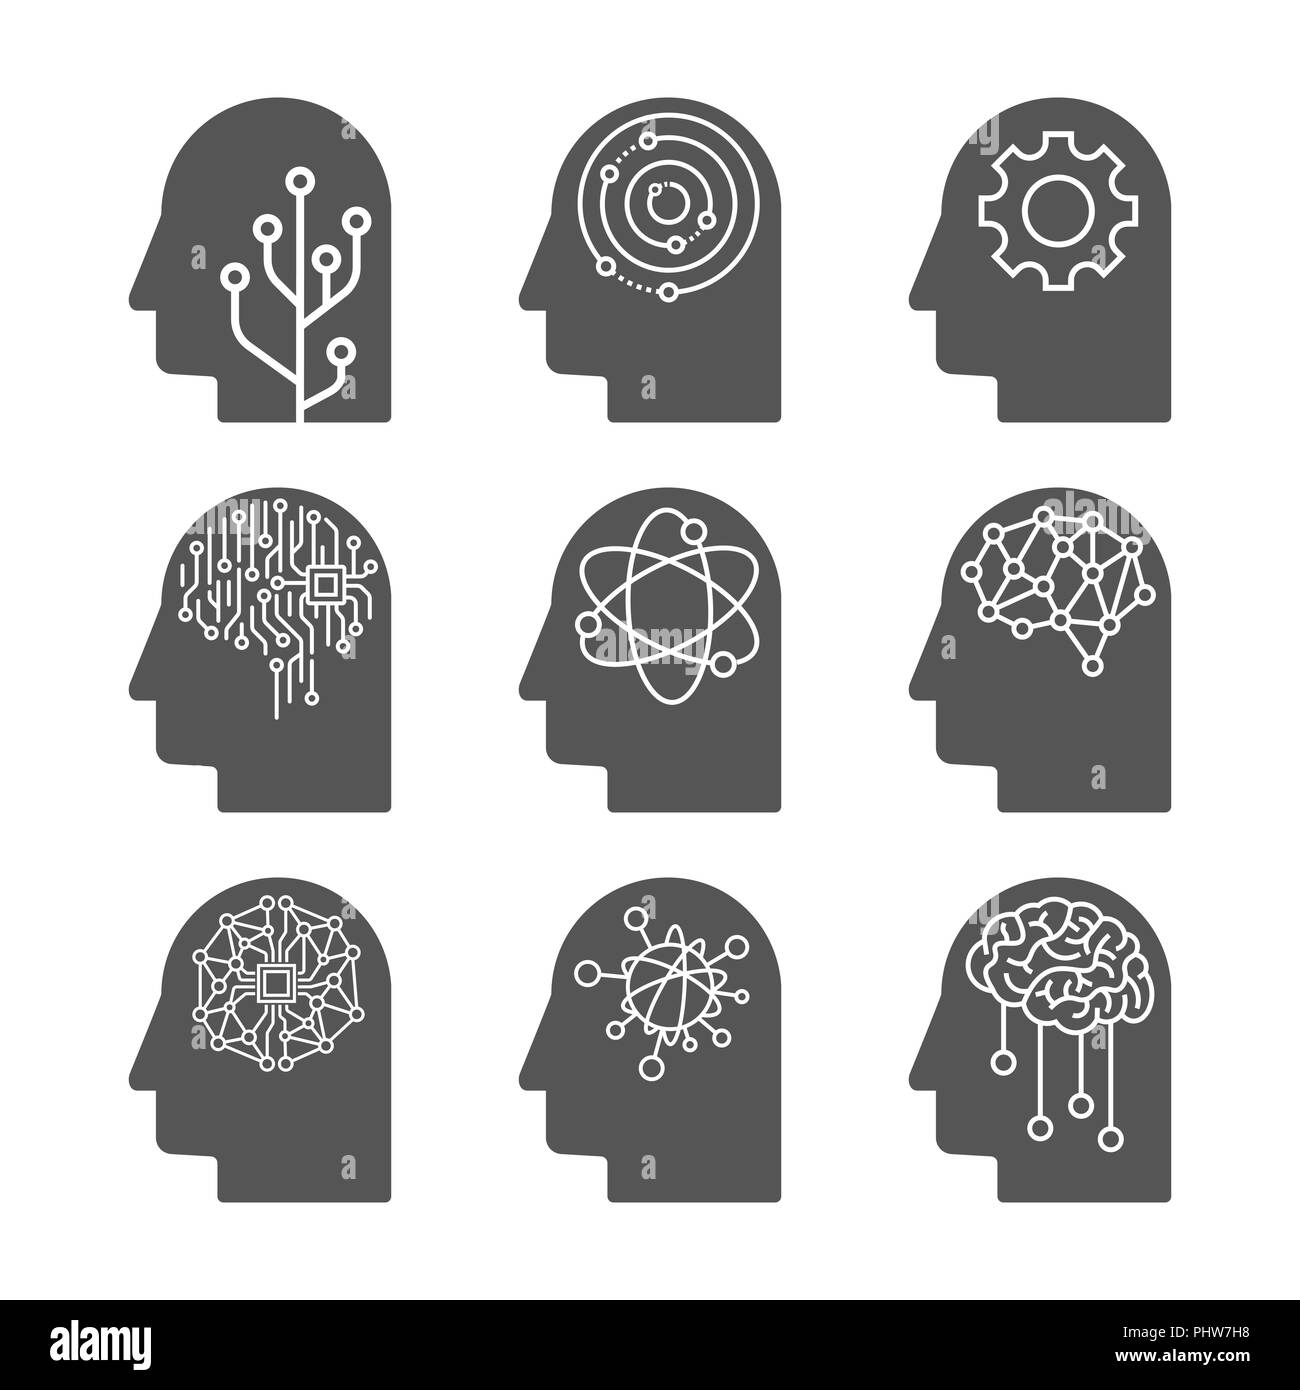 Artificial Intelligence icon set. AI heads. Deep machine learning concept Stock Vector